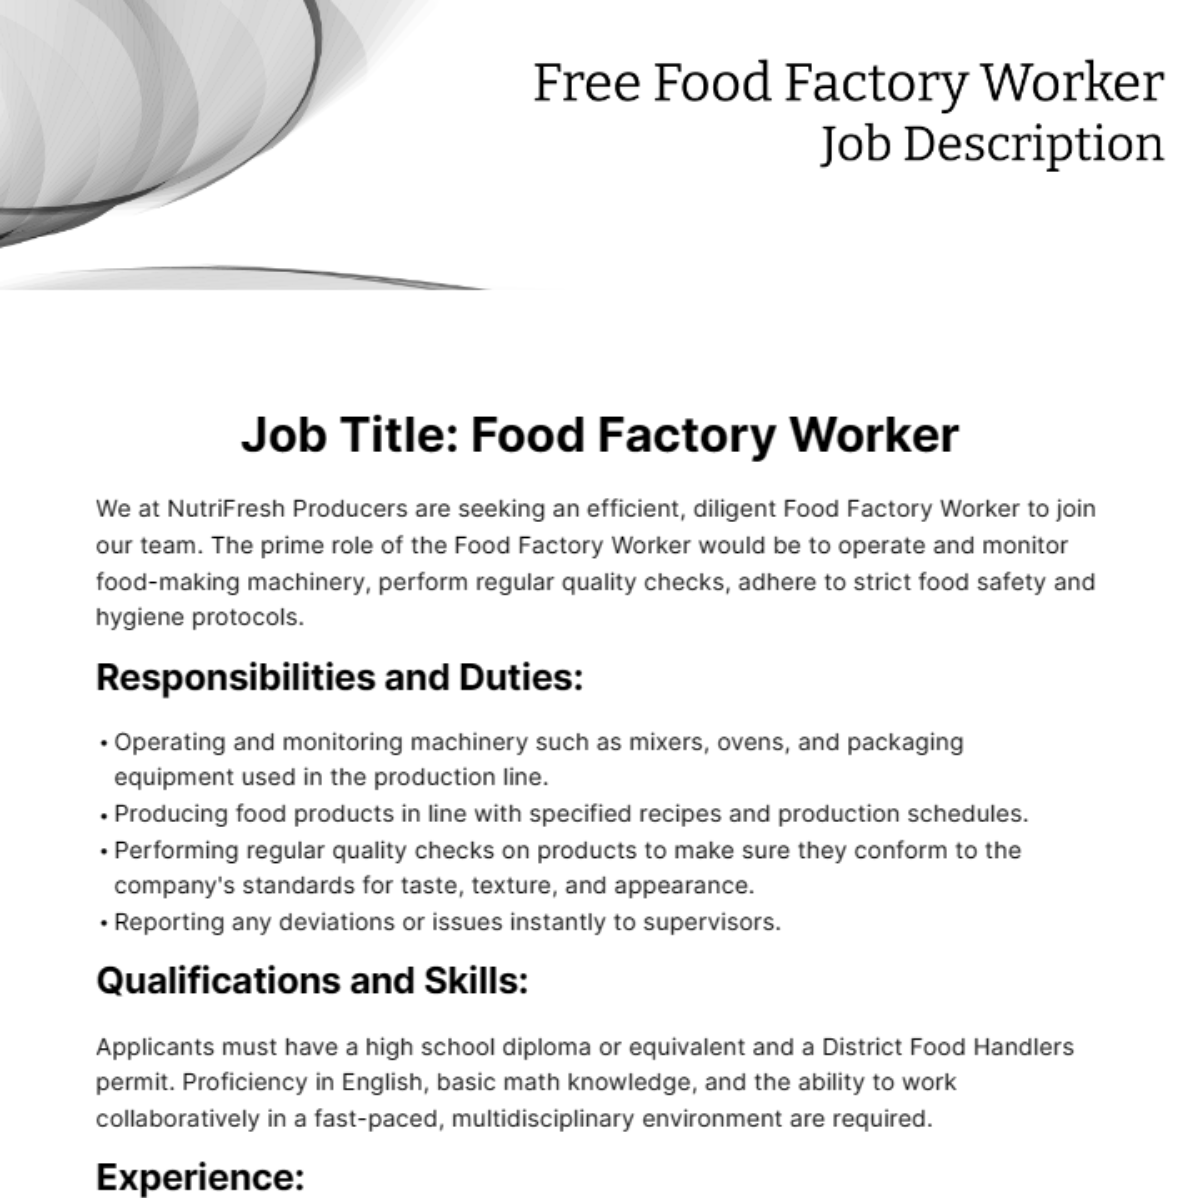 Free Food Factory Worker Duties and Responsibilities Template